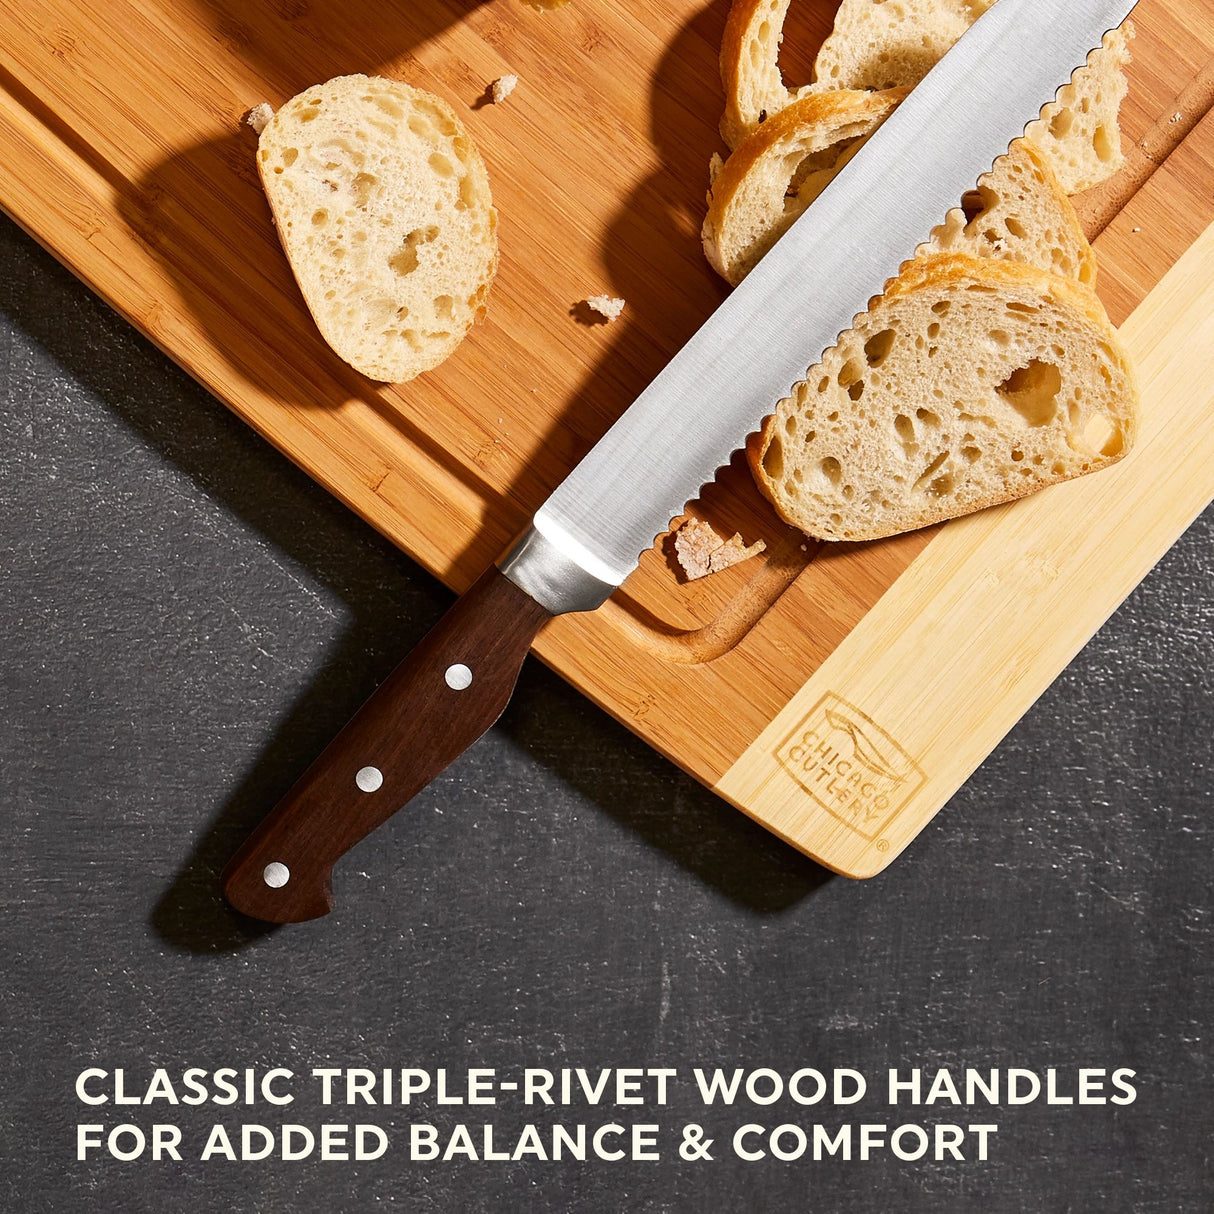  Precision Cut bread knife on cutting board with text classic triple-rivet wood handles for added balance &amp; comfort